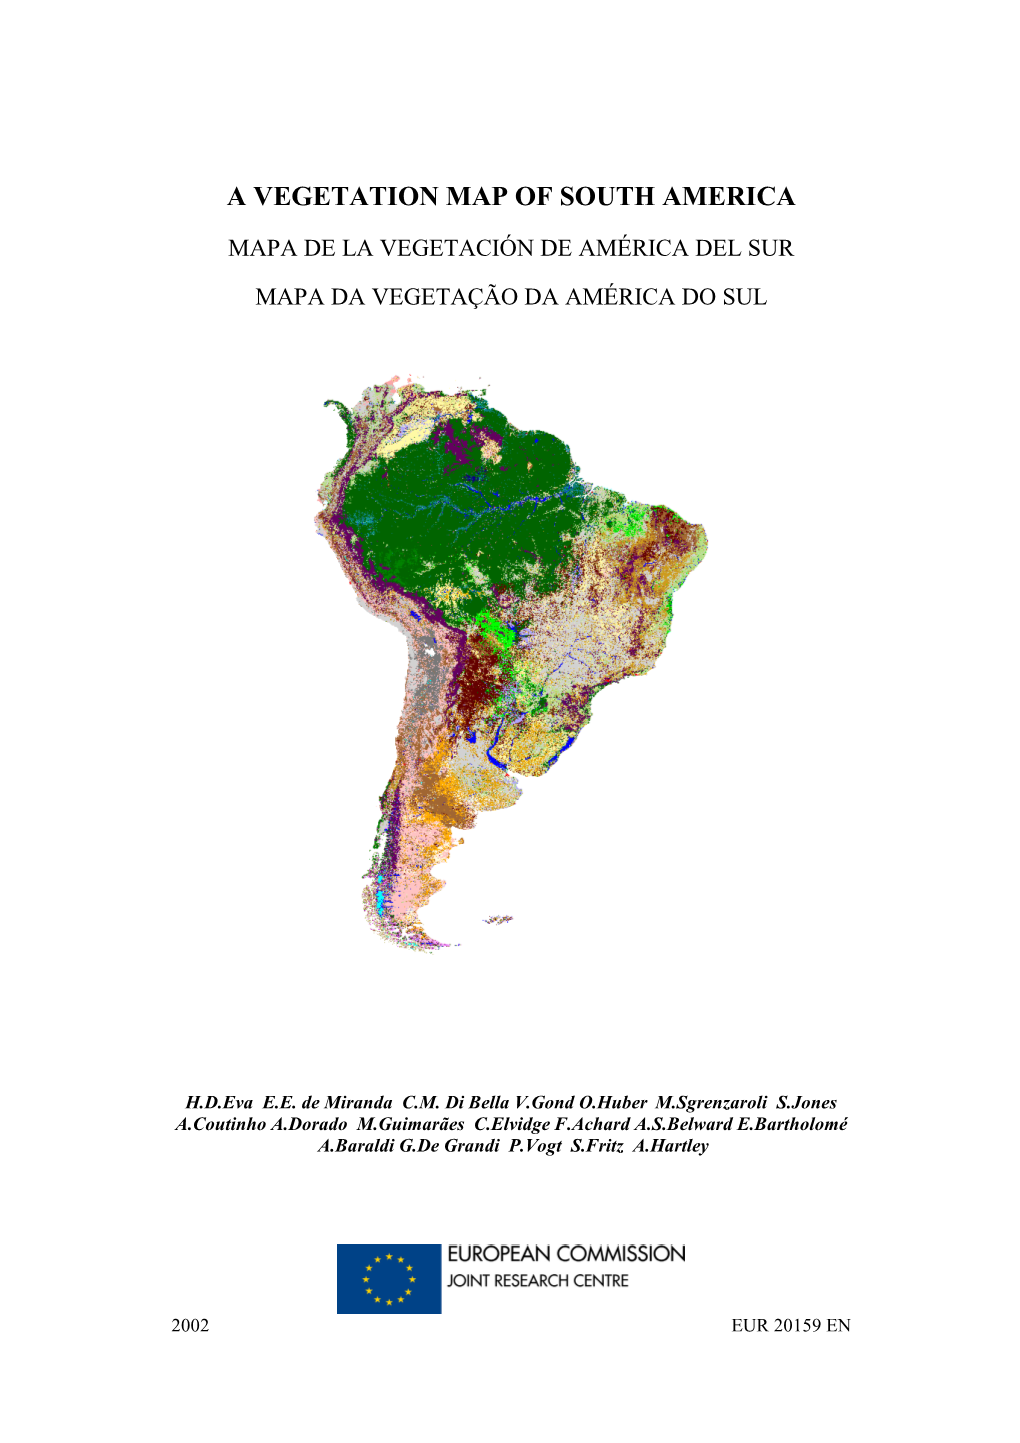 A Vegetation Map of South America